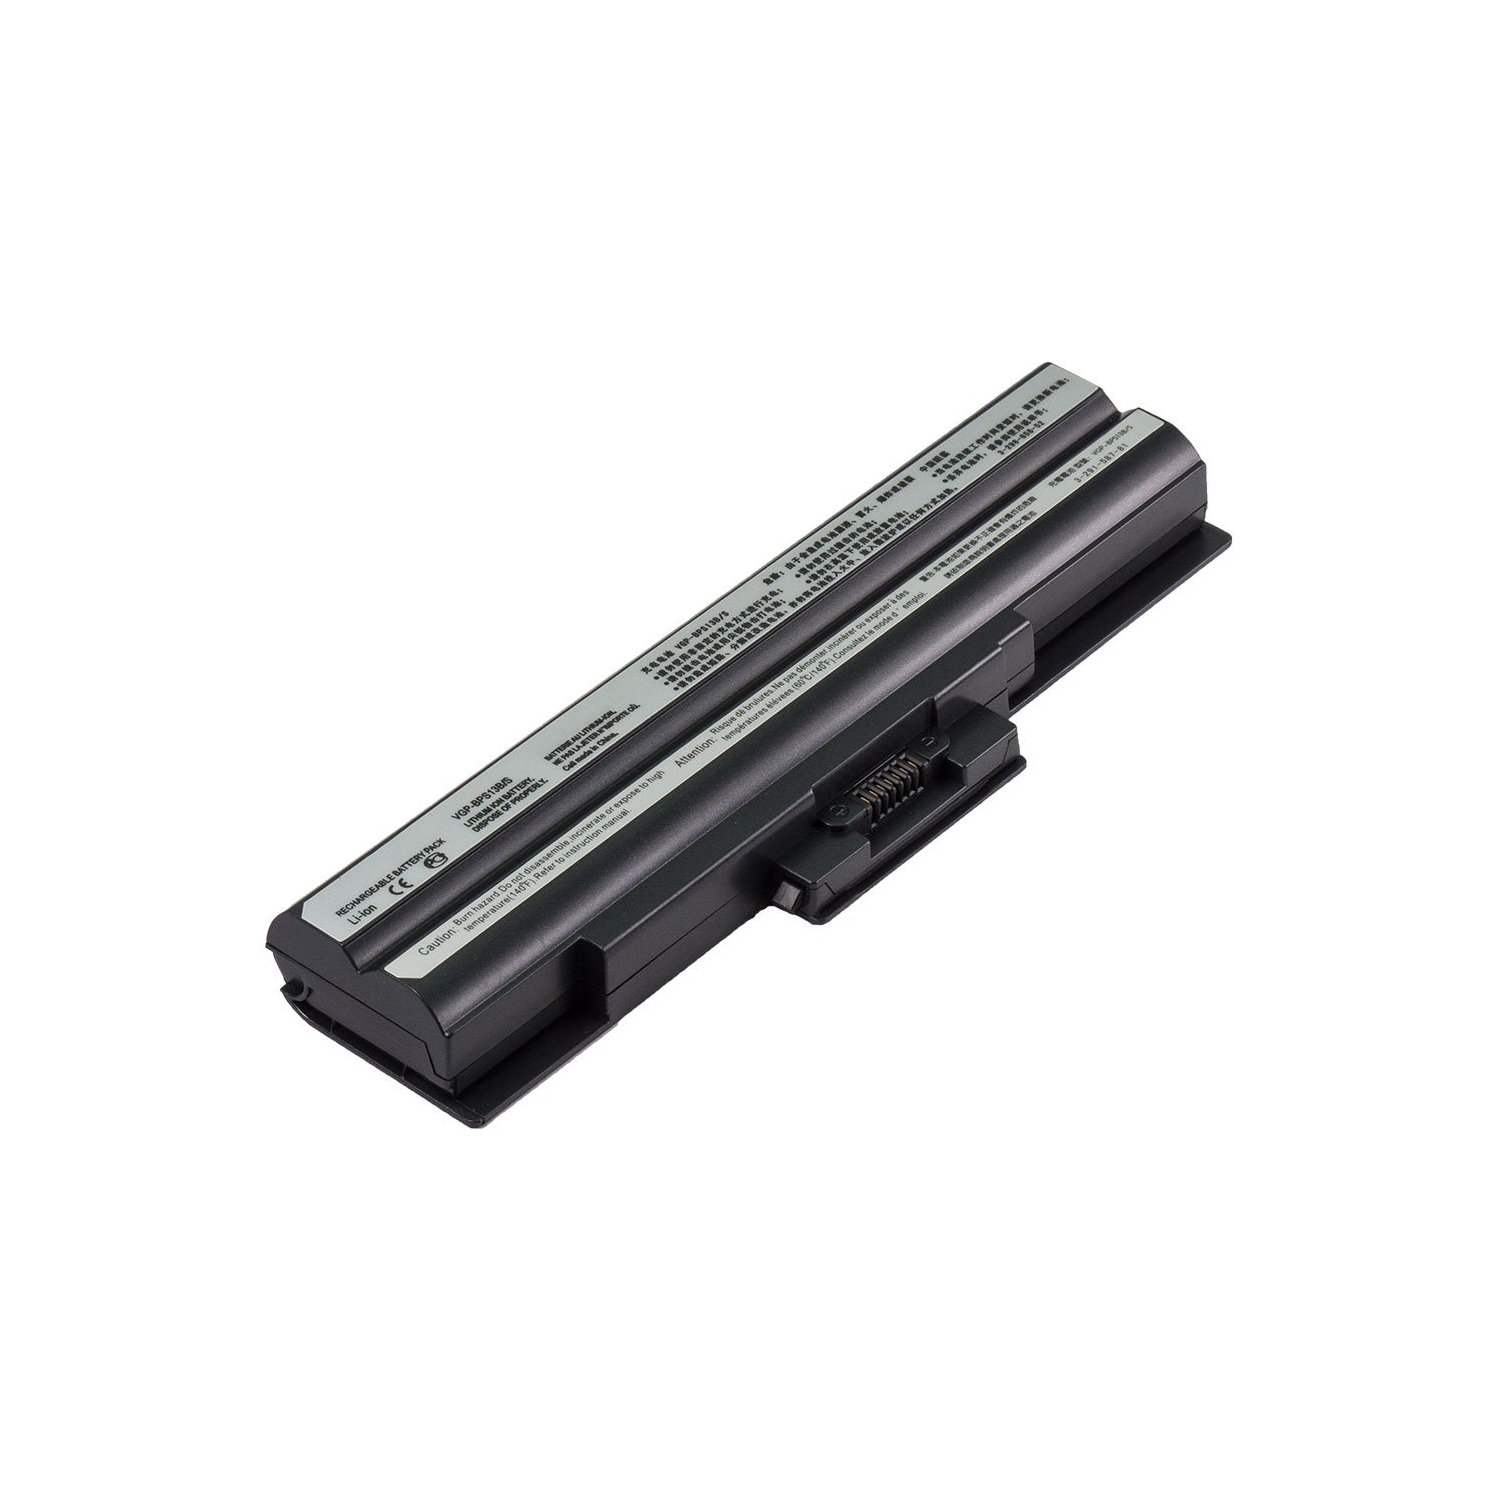 Laptop Battery Replacement for Sony VAIO VGN-FW292N, VGP-BPS13, VGP-BPS13/S, VGP-BPS13A/Q, VGP-BPS13B/B, VGP-BSP13/S